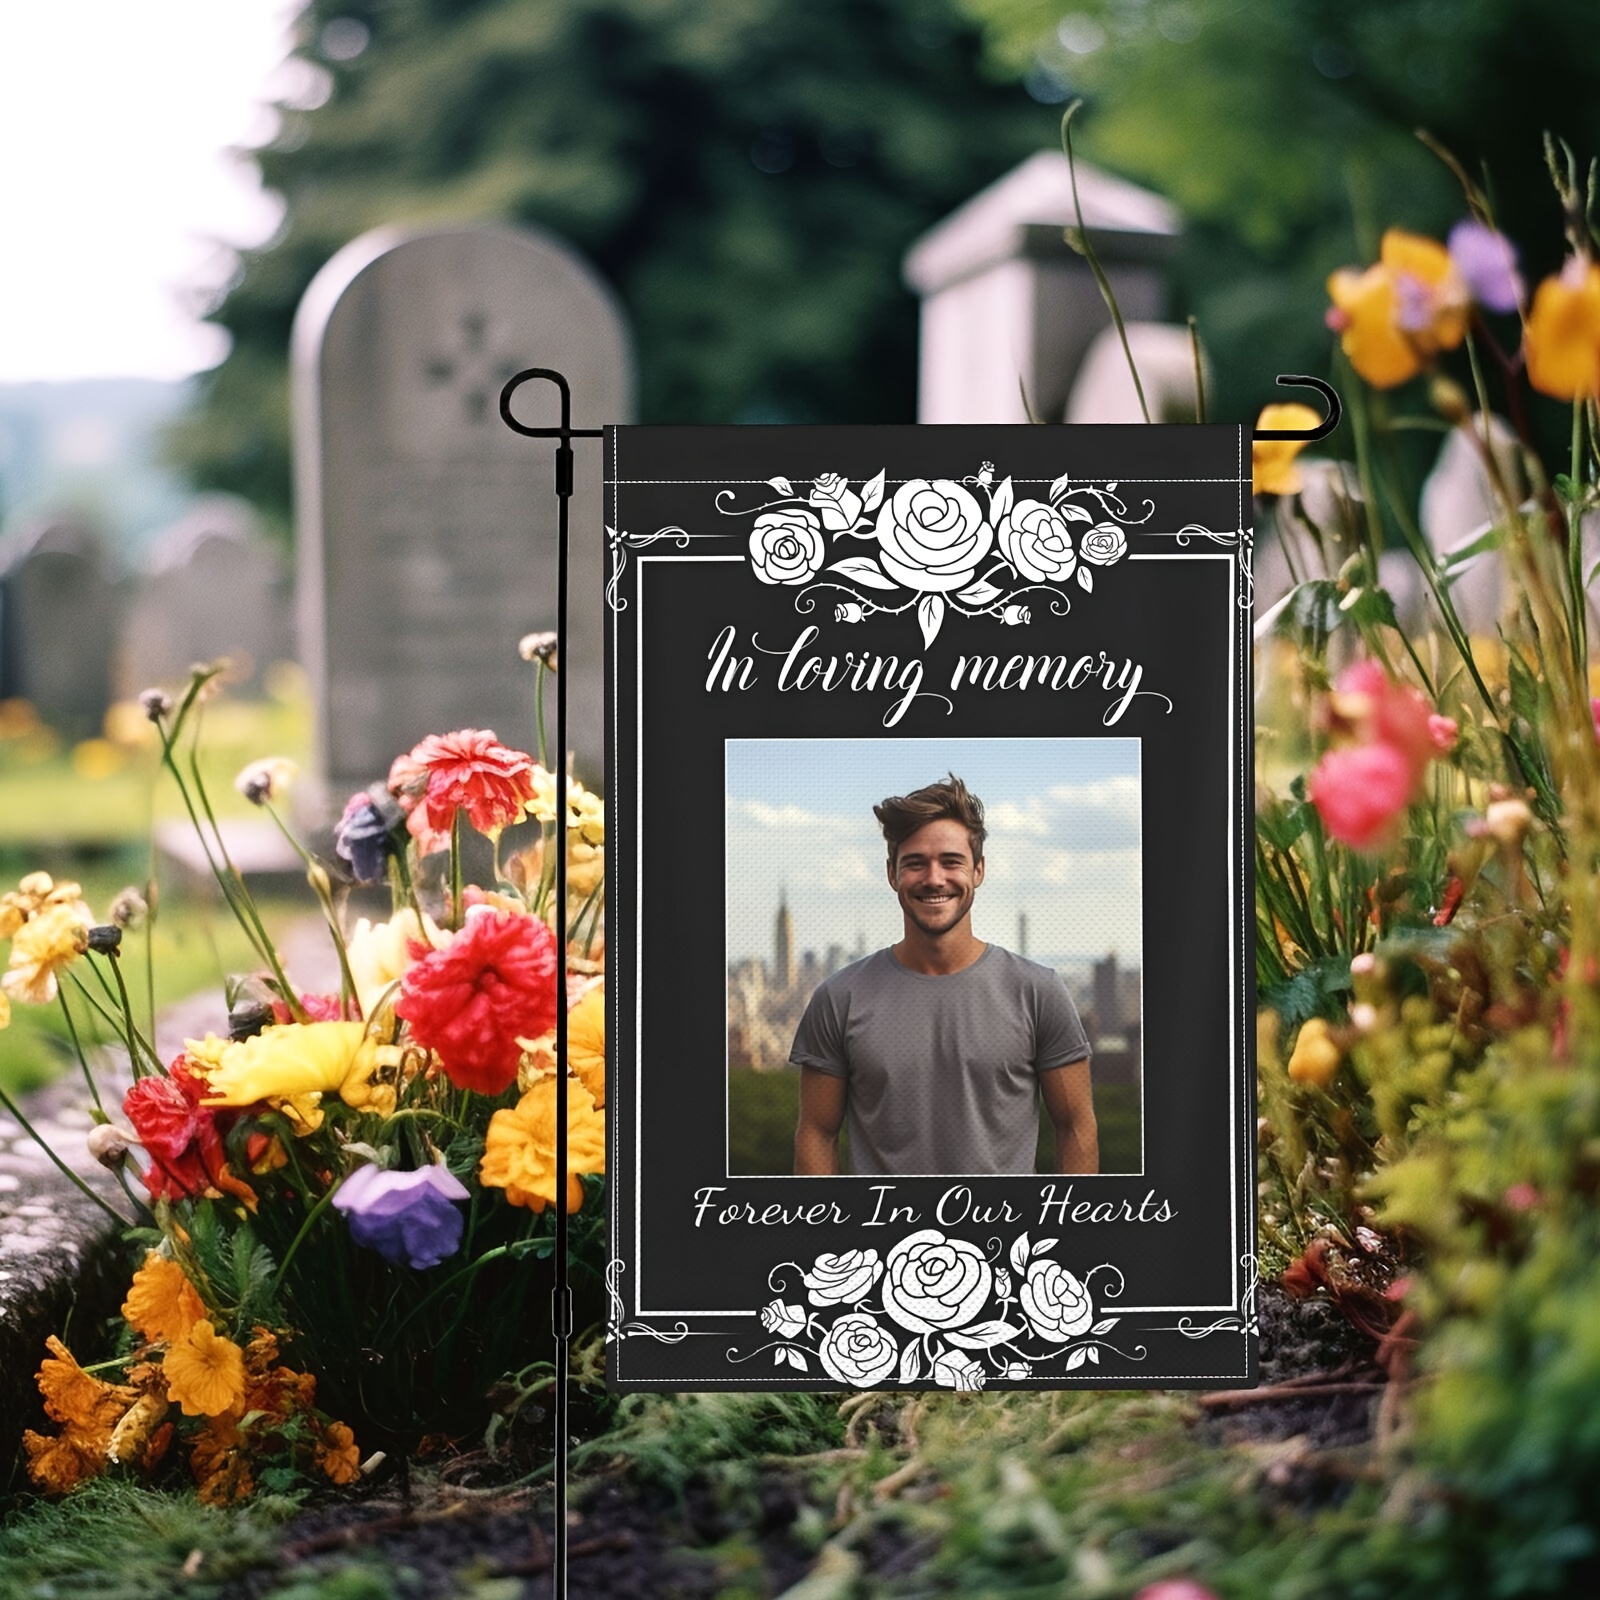 

1pc, In Loving Memory, Custom Personalized Memorial Garden Flags With Photo, Customized Funeral Sign Memorial Gifts, Decorations For Cemetery Grave Outdoor Yard Lawn, No Metal Brace, 12x18in